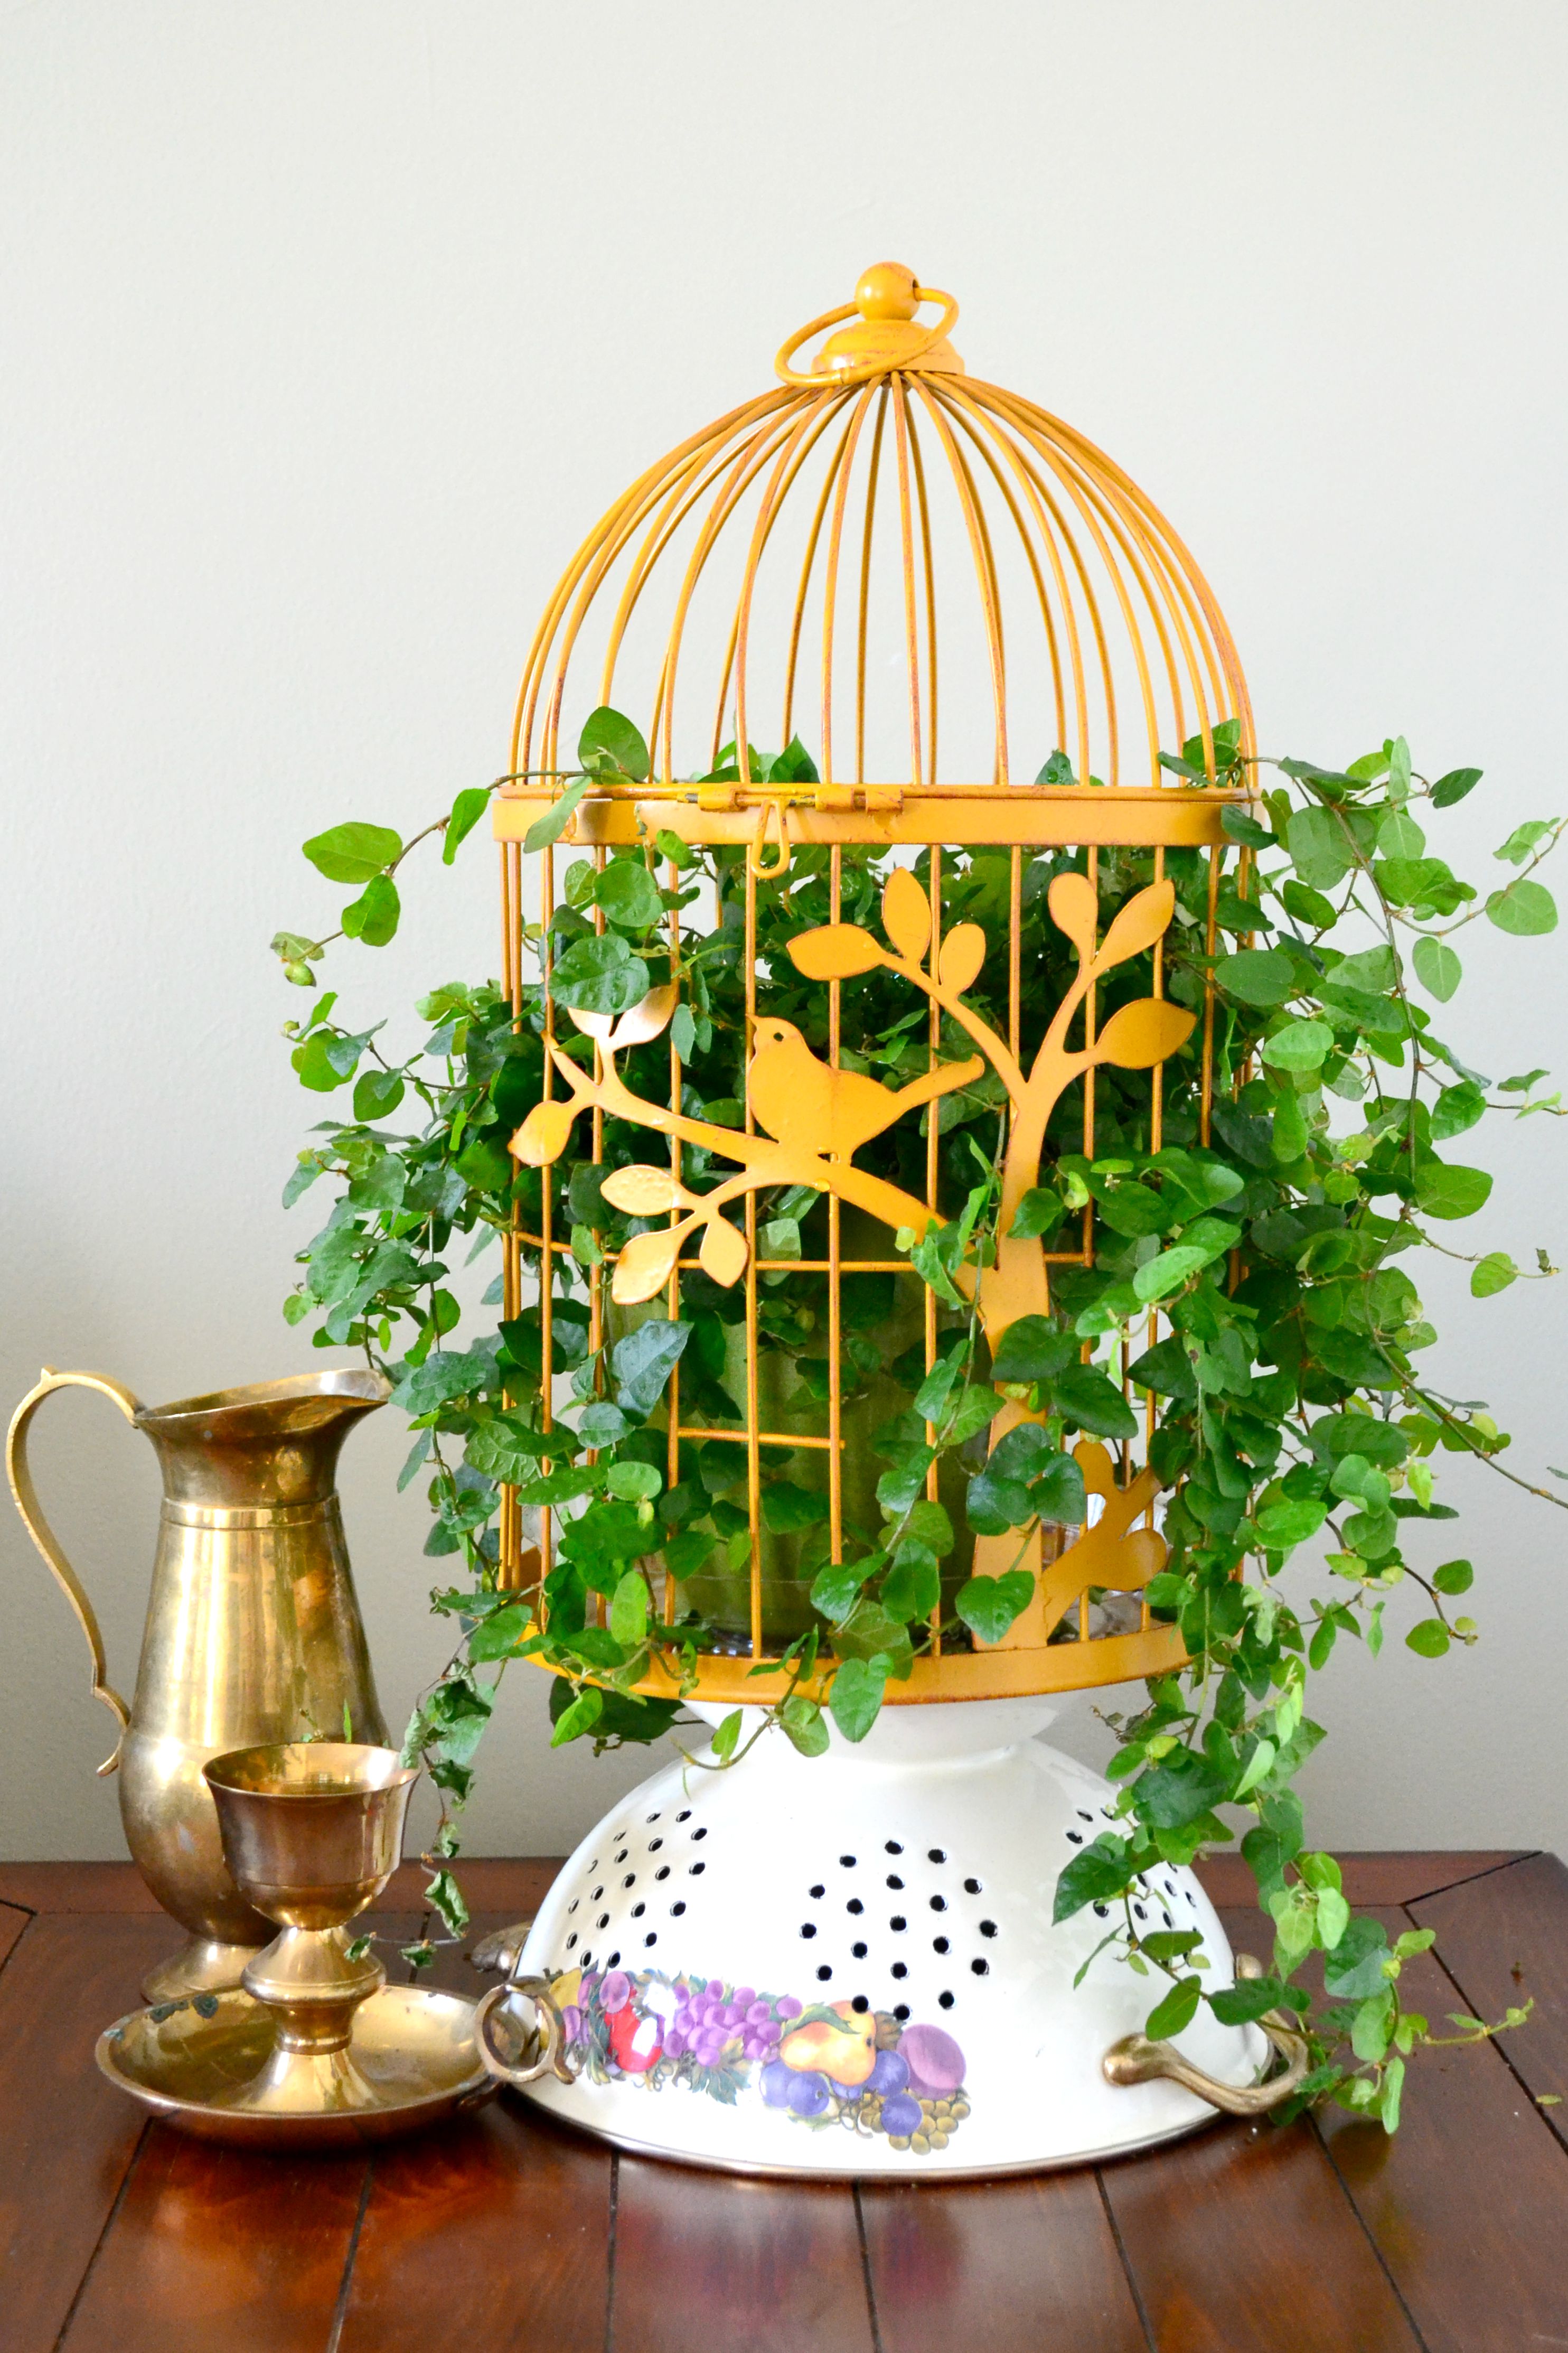 Bird Cage Planters Are Fun And Eye-catching Decor For Your Garden